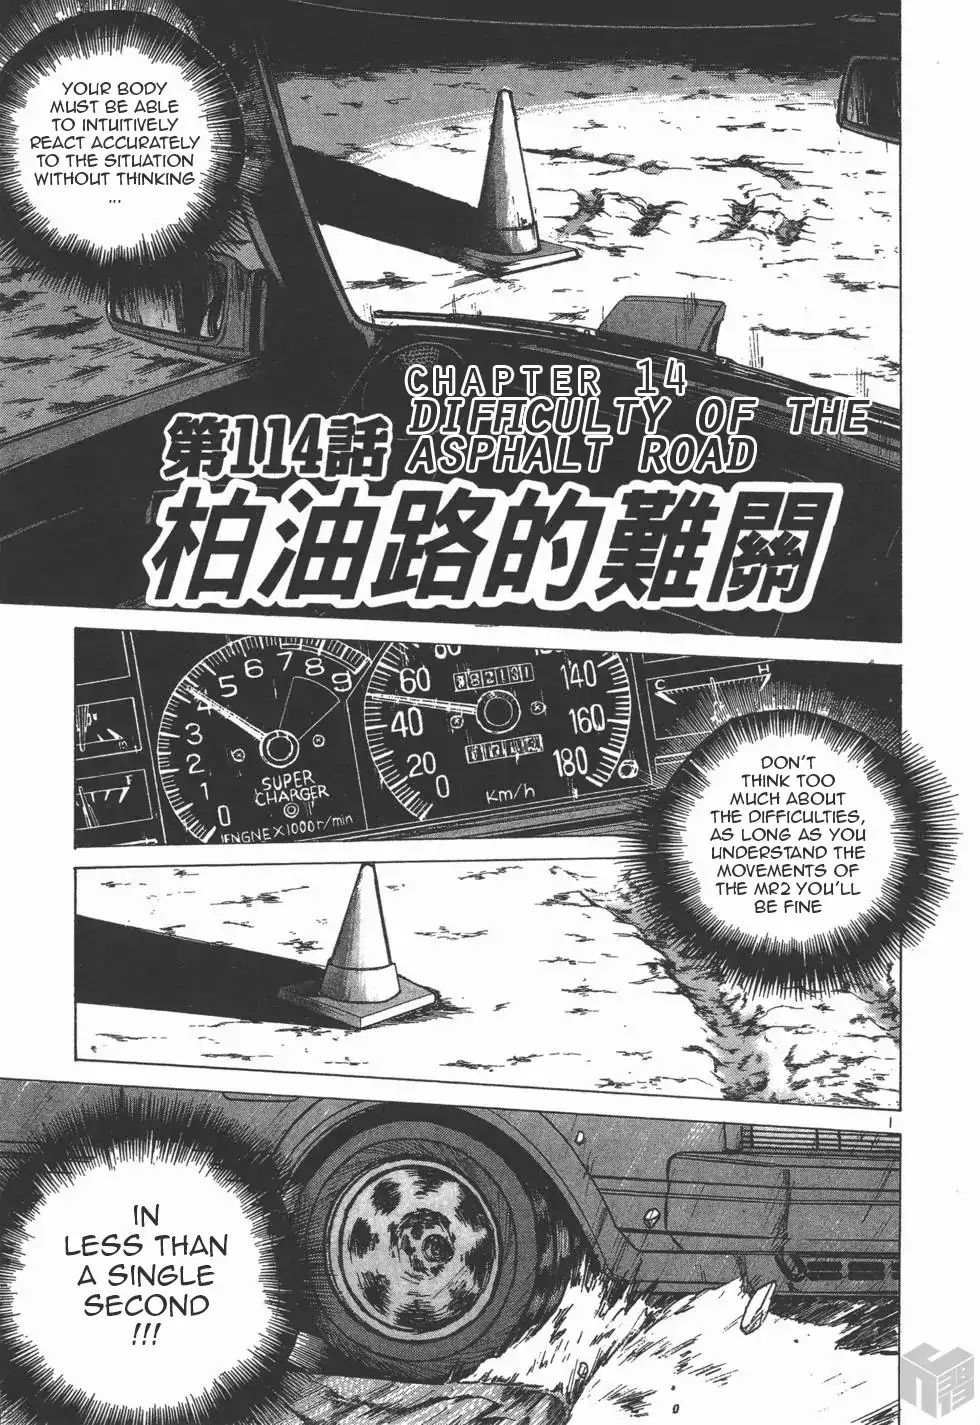 Over Rev! Vol.10 Chapter 114: Difficulty Of The Asphalt Road - Picture 1